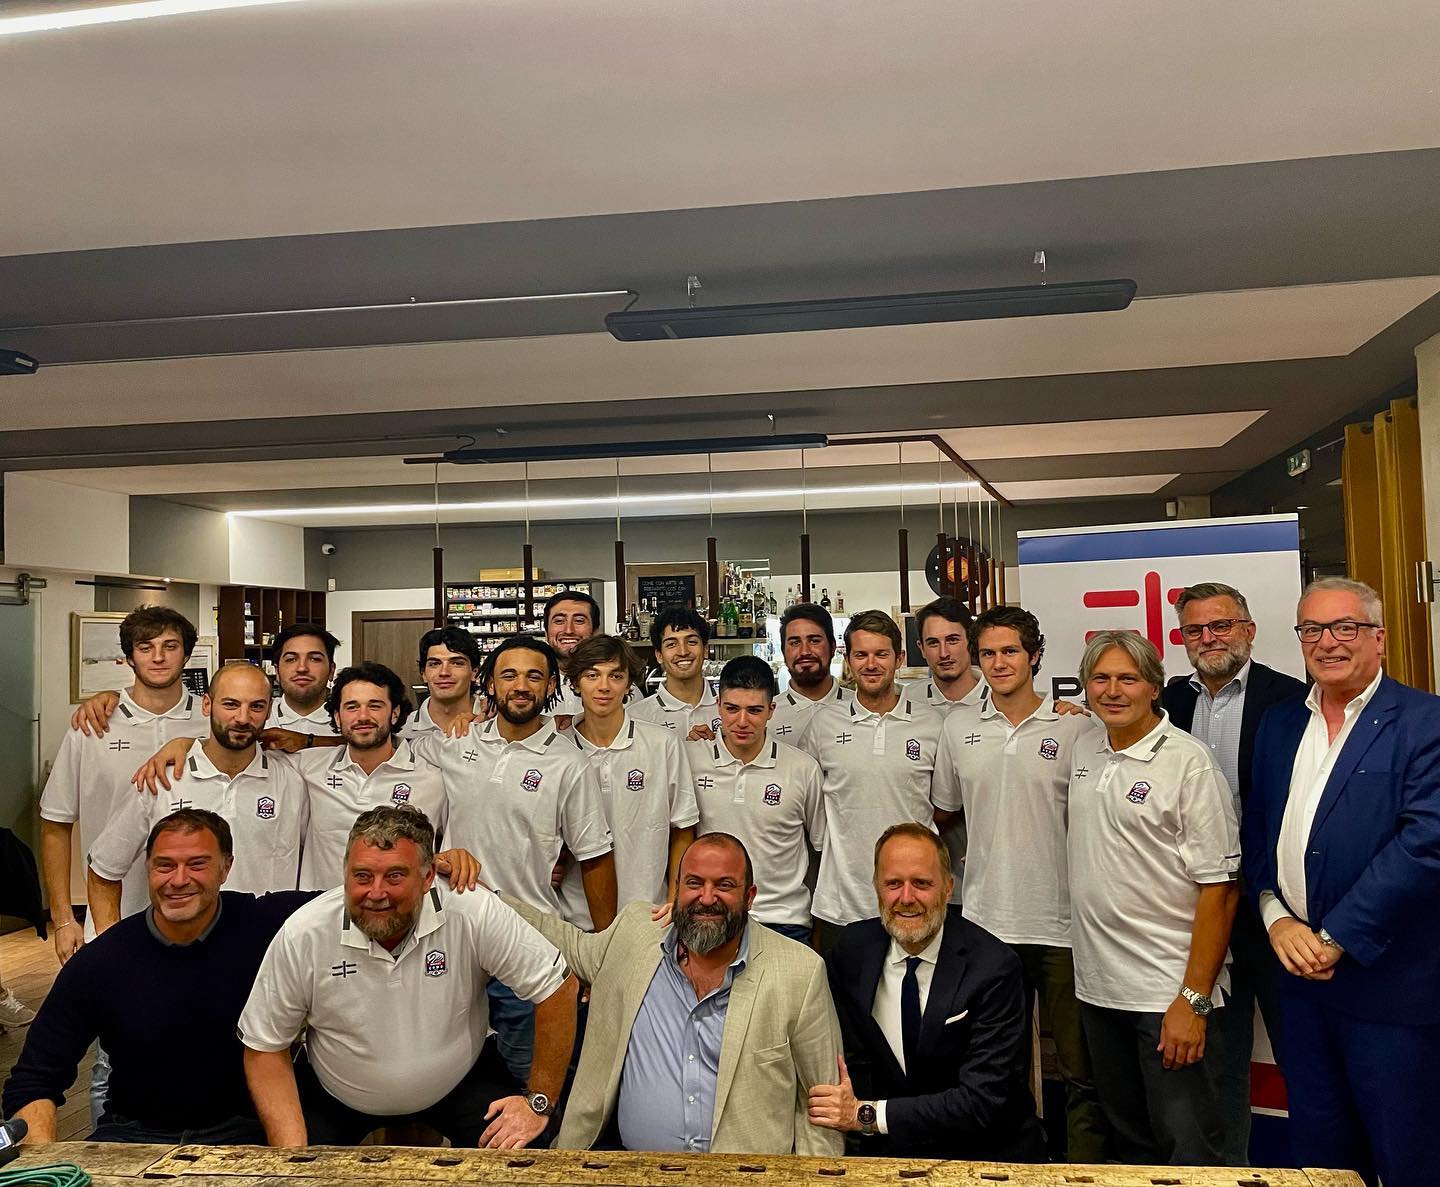 Hockey Cuomo: The biancoblù 2022/23 squad that appeared on Saturday 24th in the league was revealed